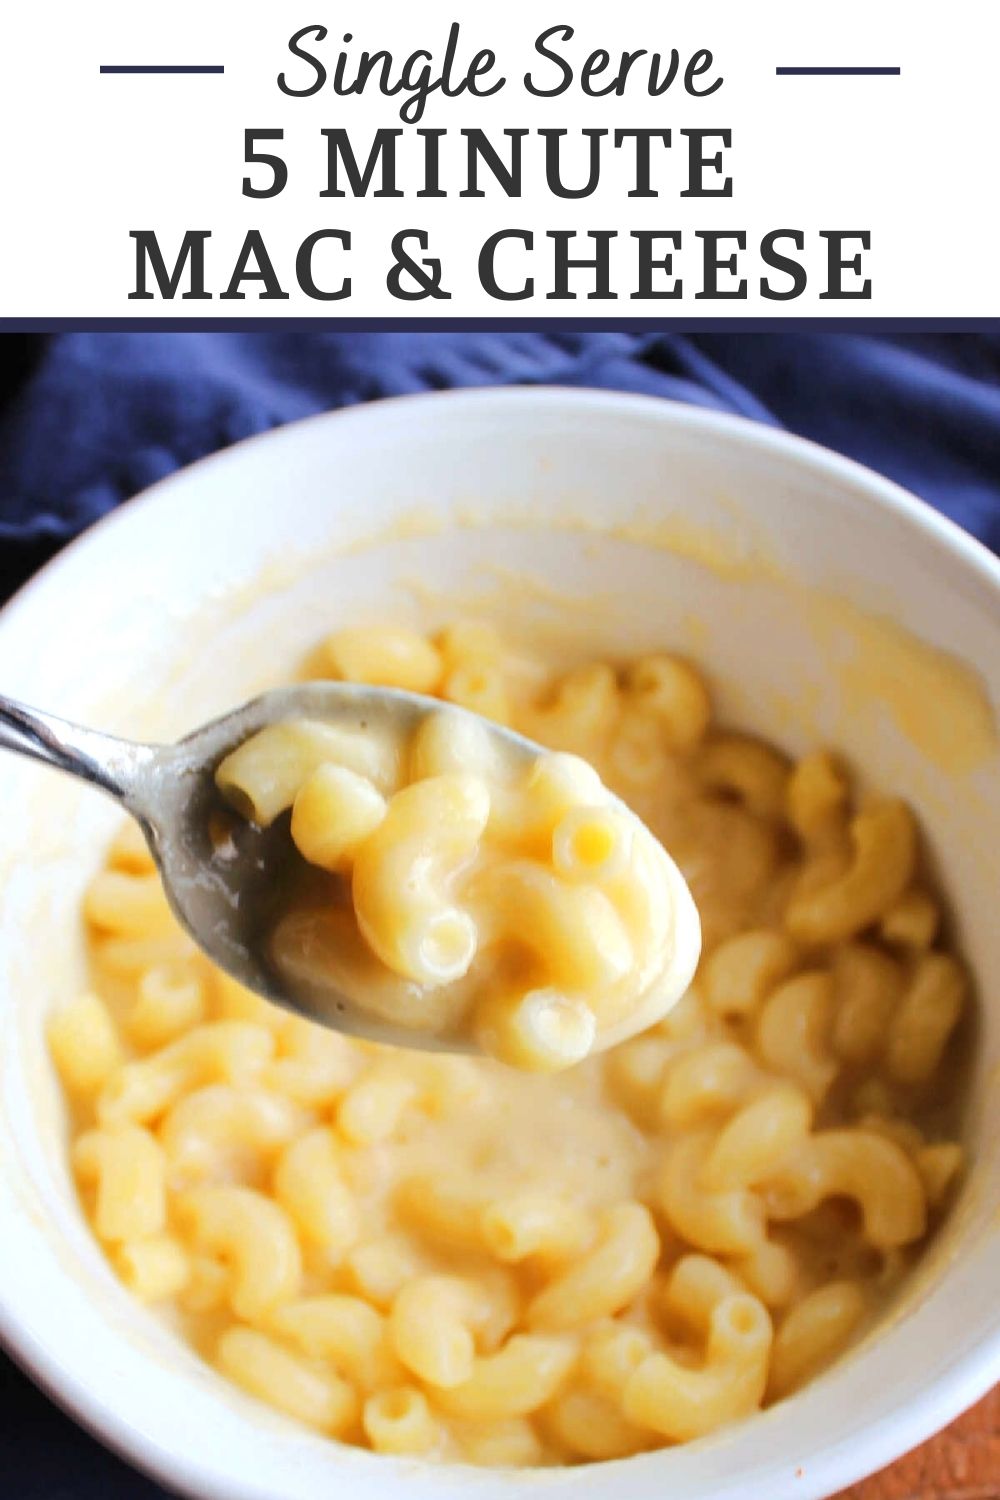 5 minute mac and cheese allows you to have a single serving of creamy cheesy pasta in a jiffy. This easy recipe basically makes instant macaroni and cheese and it's so simple a kid can do it without help. It is perfect for lunch or a quick and filling snack.